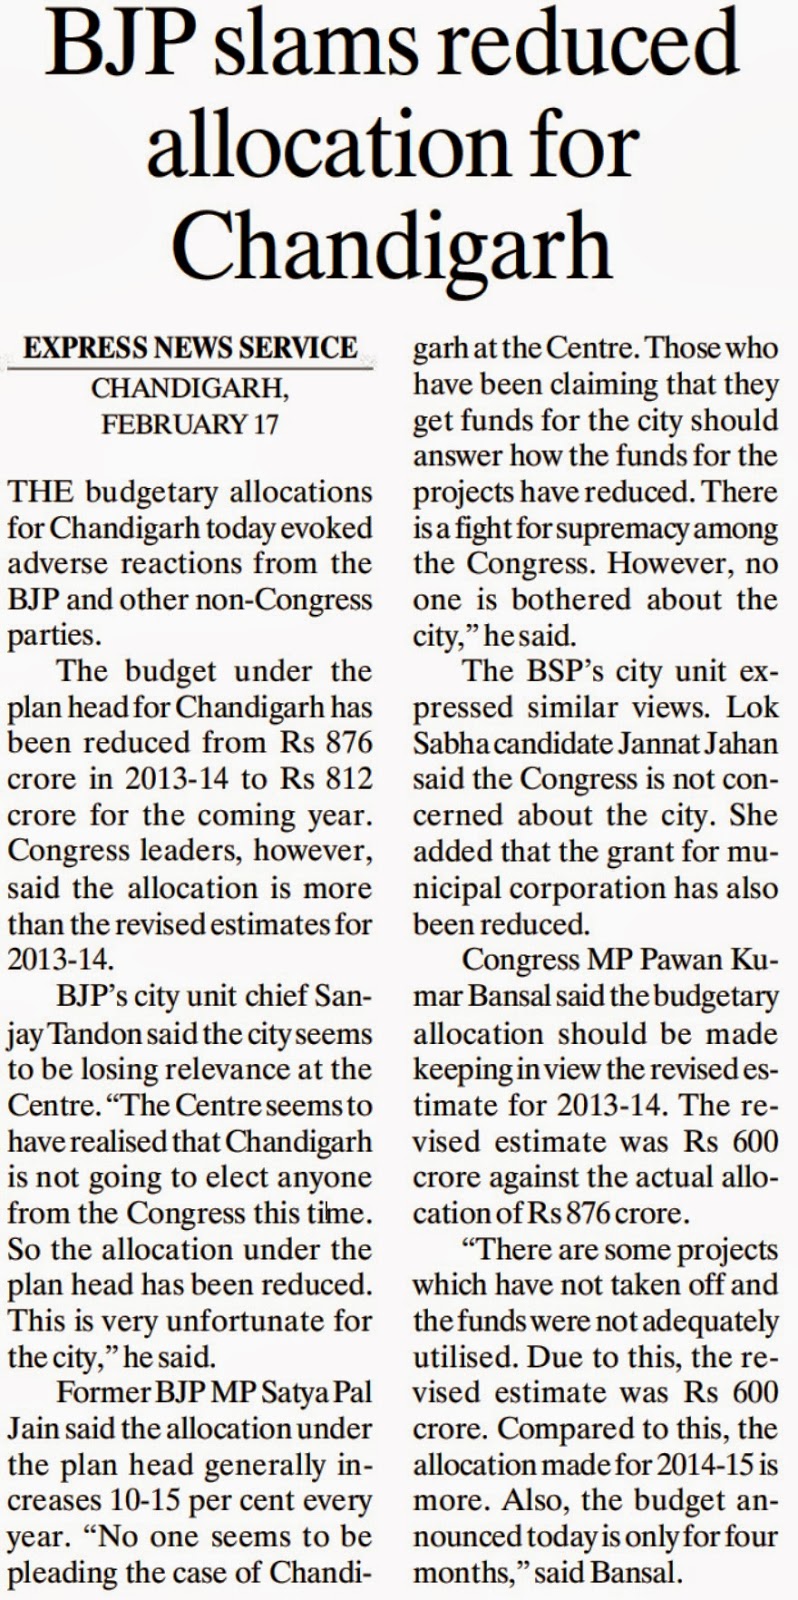 'No one seems to be pleading the case of Chandigarh at the centre. Those who have been claiming that they get funds for the city should answer how the funds for the projects have reduced. There is fight for supremacy in the Congress. However, no one is bothered about the city.' - Satya Pal Jain